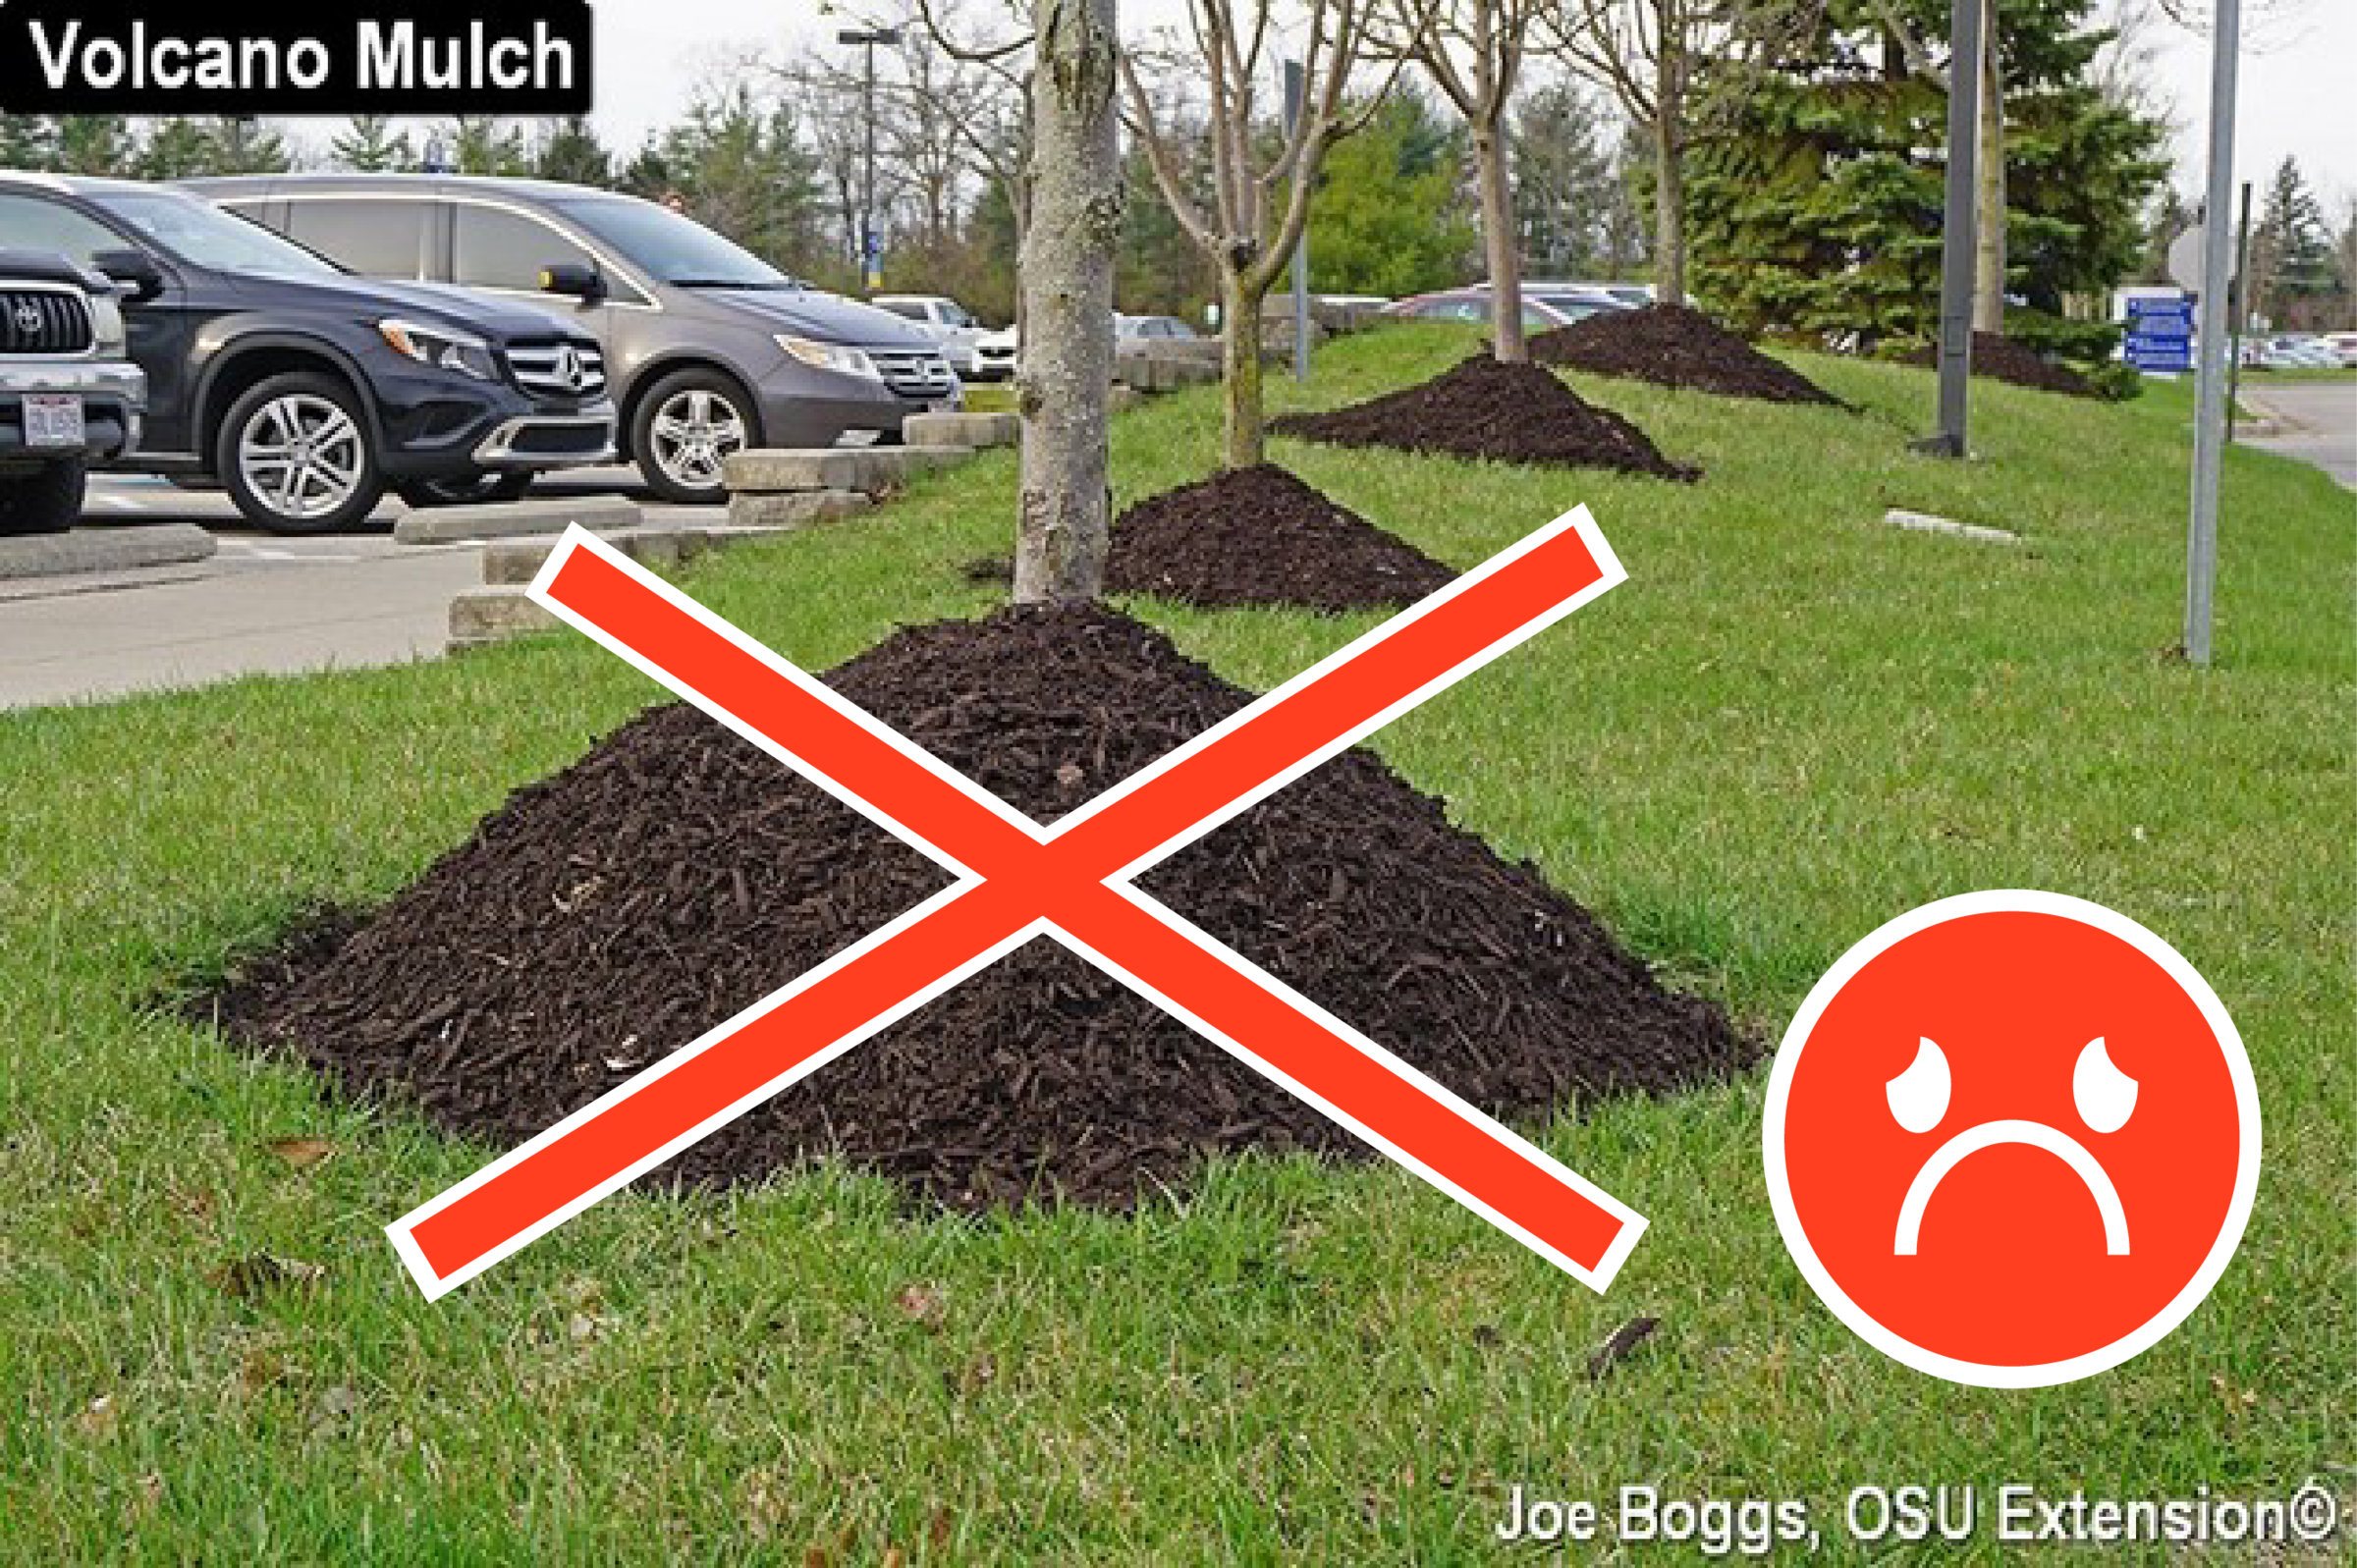 A series of trees with mulch volcanoes receding to the background - they are piled high with egregious amounts of mulch that looks mountain-like and will harm the tree. Superimposed on the foremost mulch volcano is a big red "X" and a sad face.